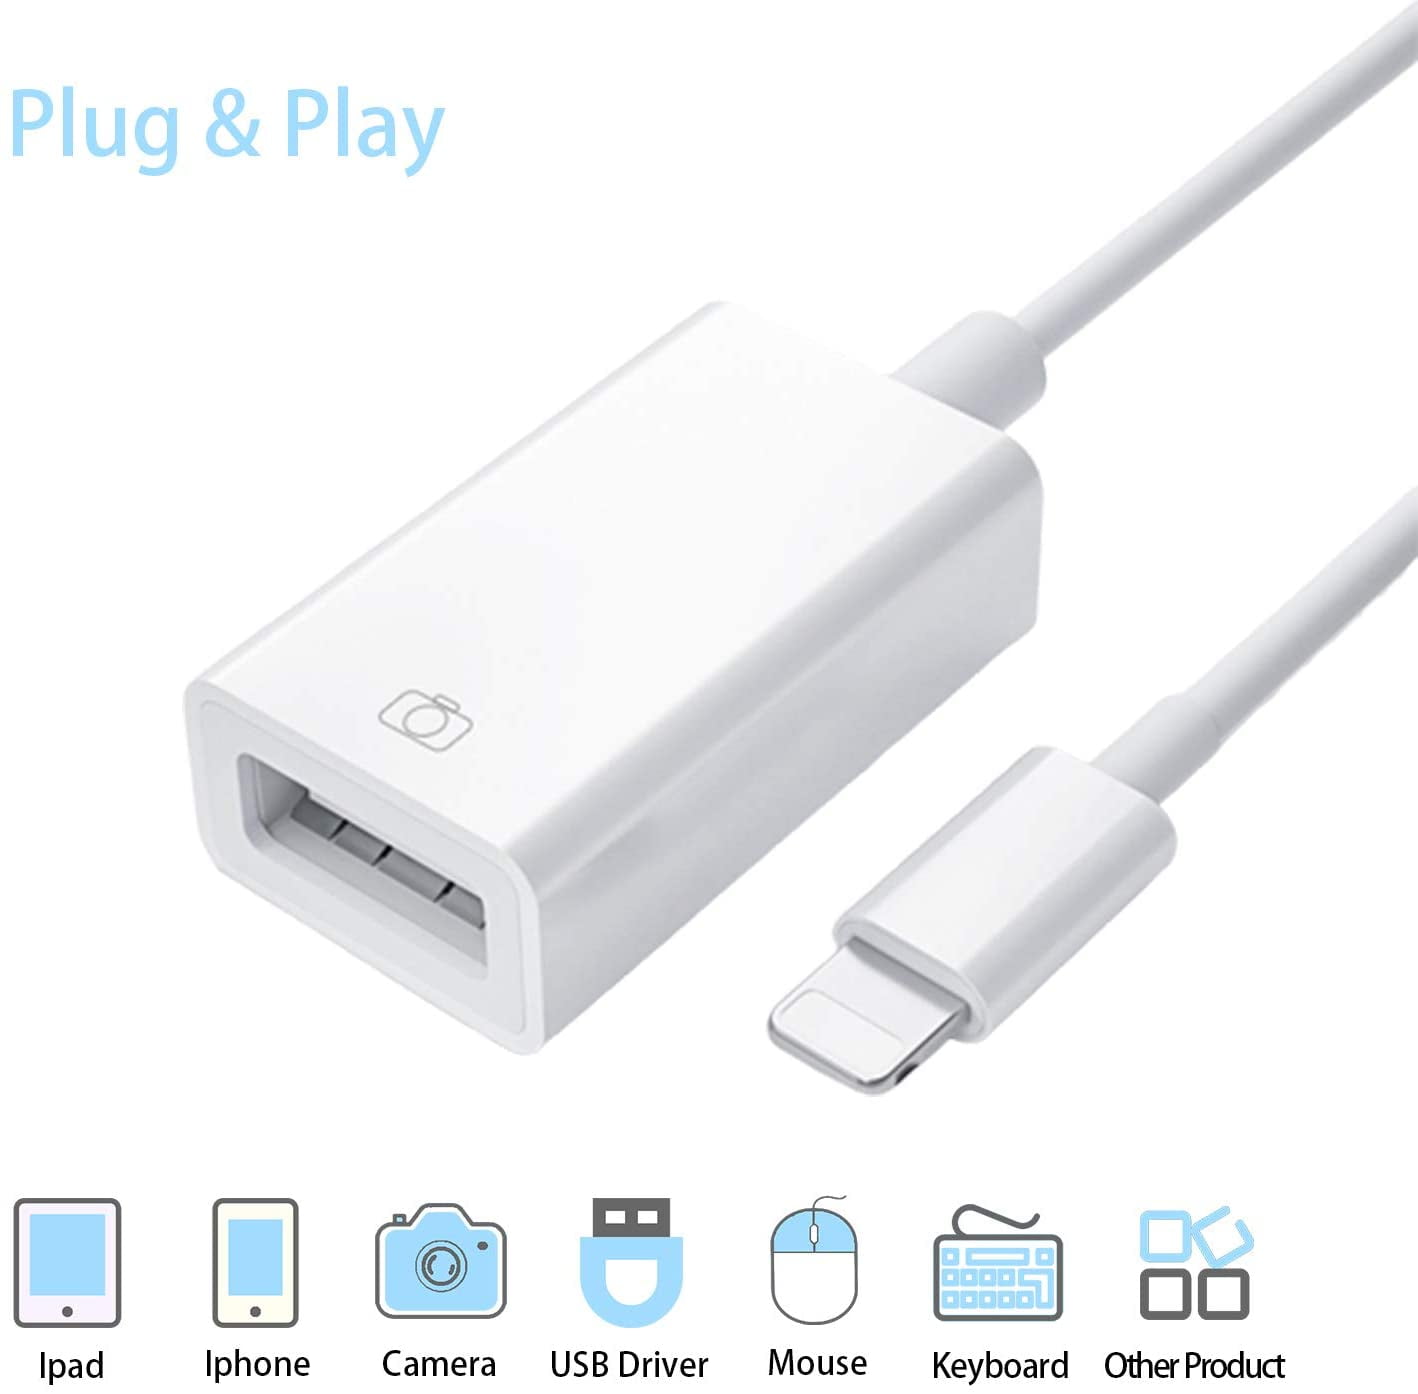 Pat suffer TV set USB Camera Adapter, USB OTG Adapter Compatible with iPhone 11 X 8 7 6 iPad  Air Pro Mini, USB Female OTG Adapter Supports USB Flash Drive, Mouse,  Keyboard Electric Piano Drum, Game Controller - Walmart.com